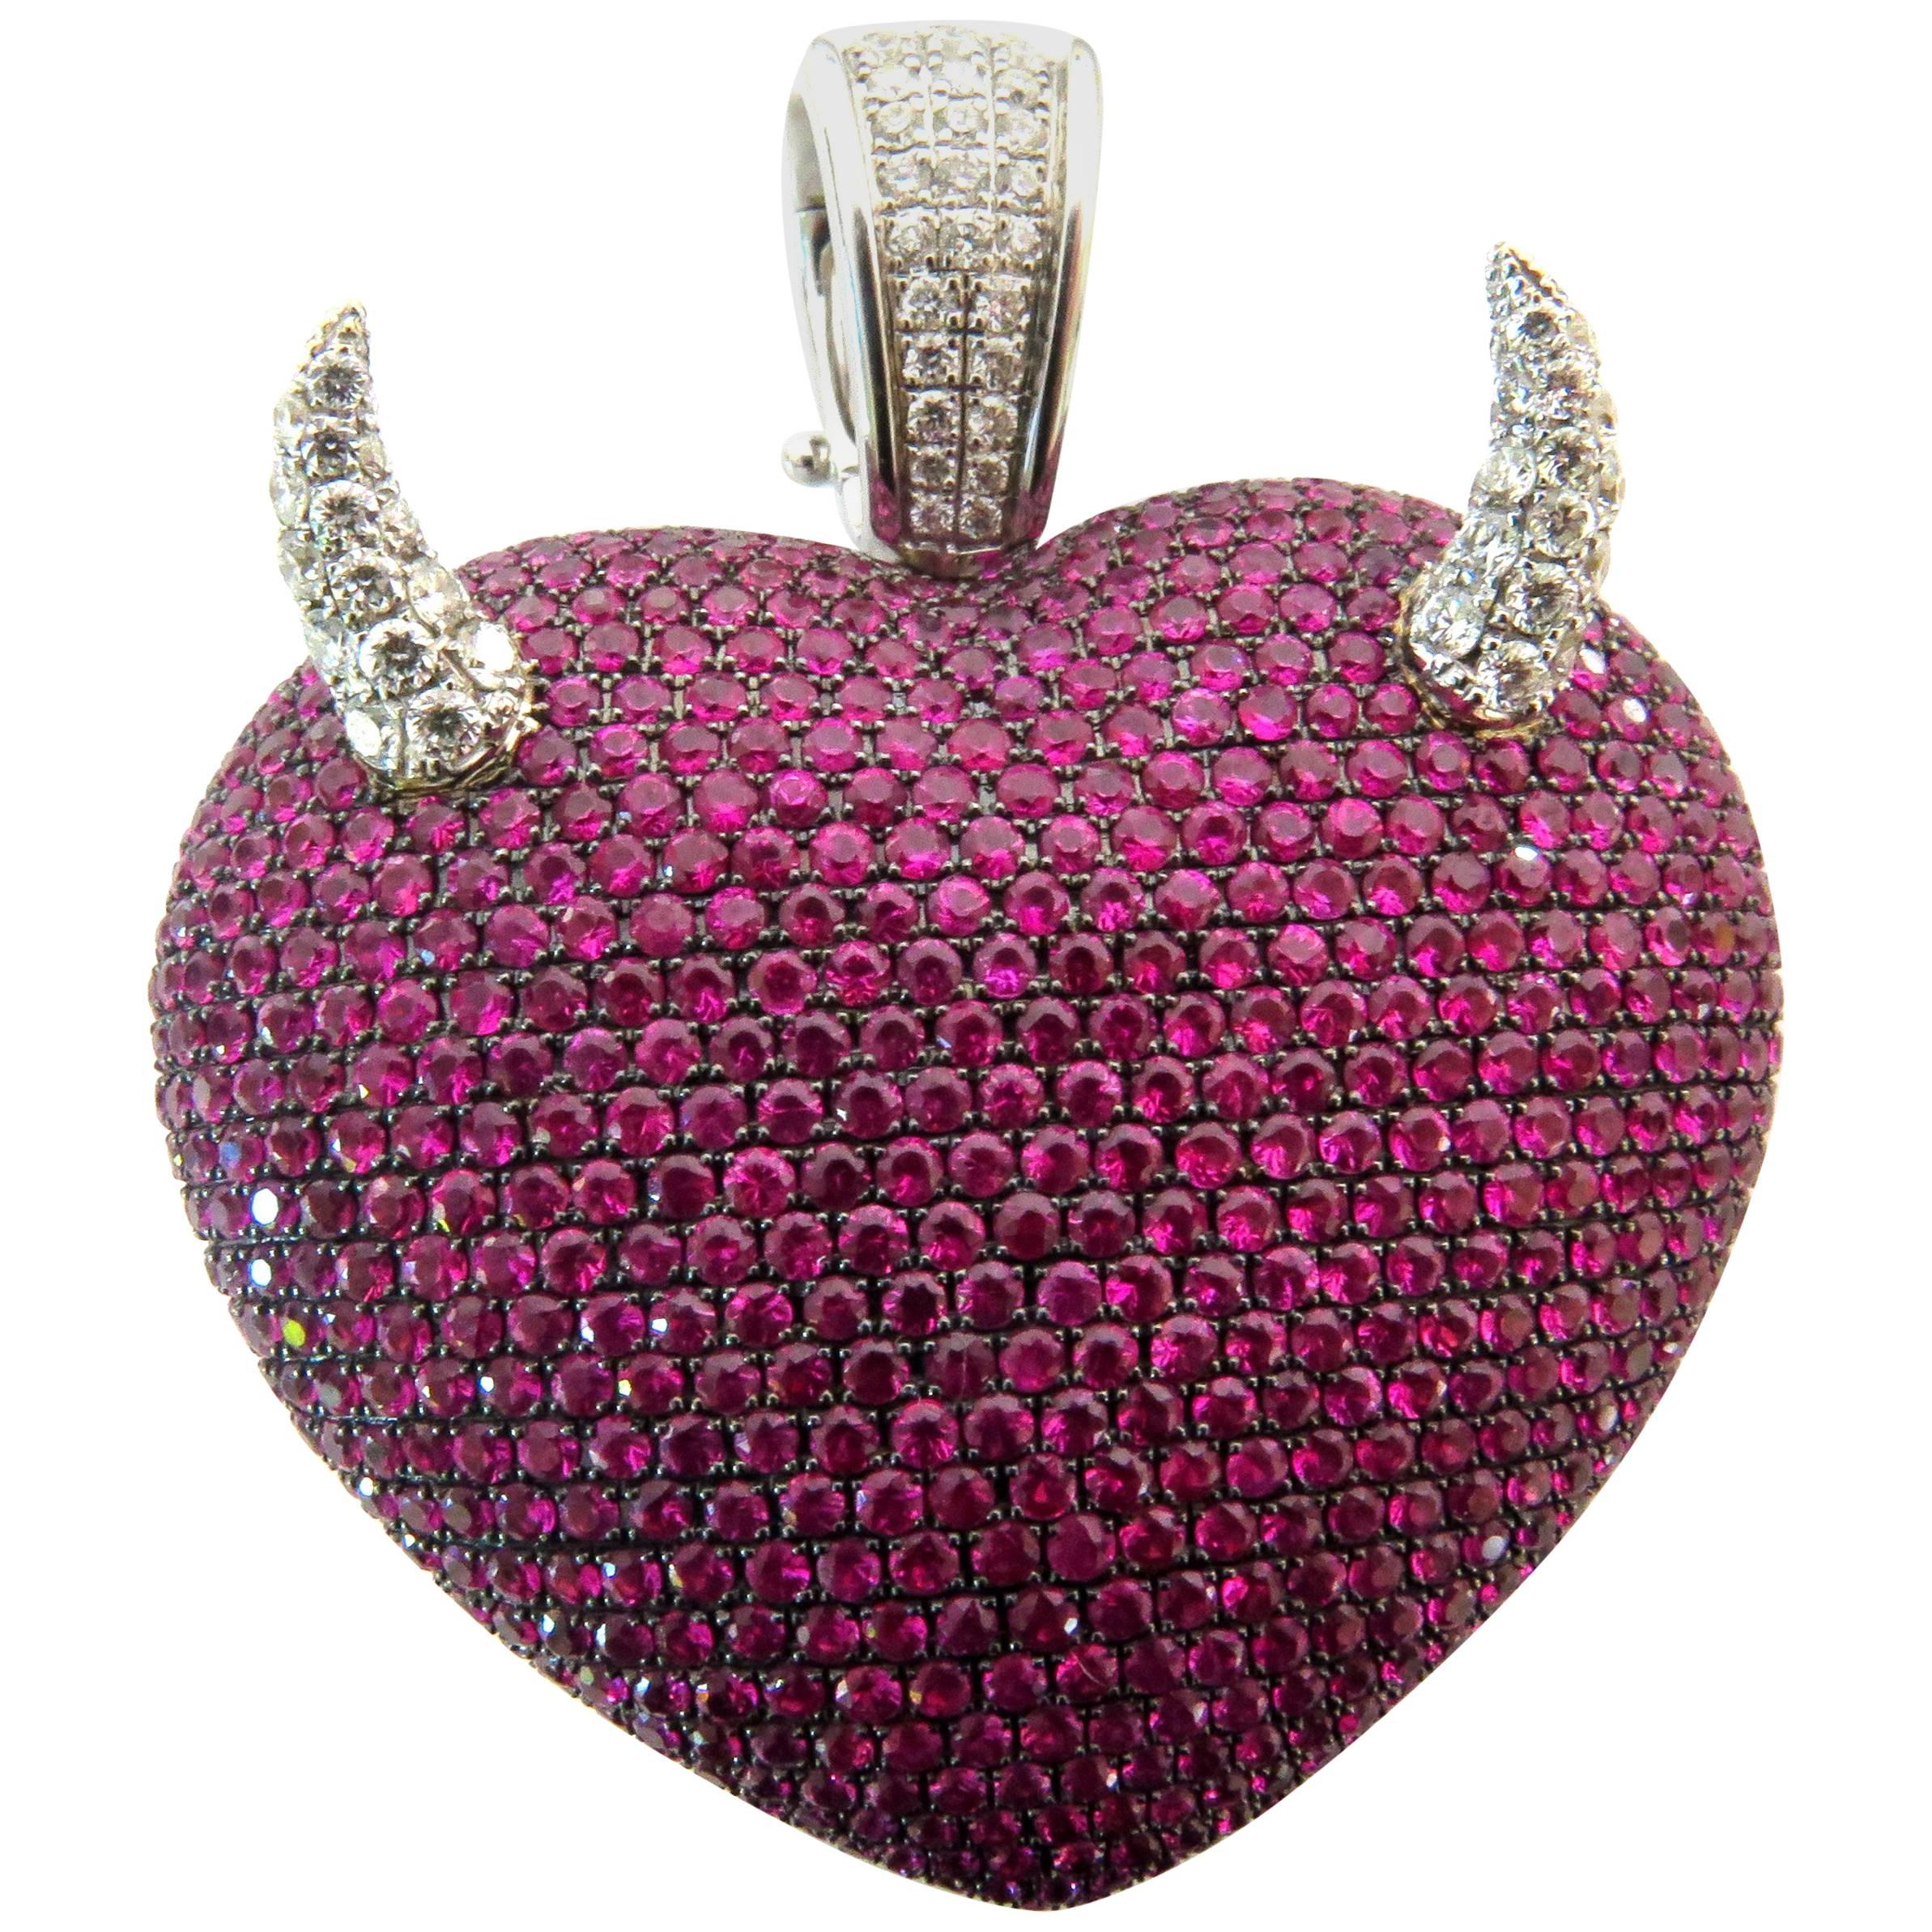 Spectacular Theo Fennell Large Ruby Heart with Diamond Horns Gold Pendant Charm For Sale